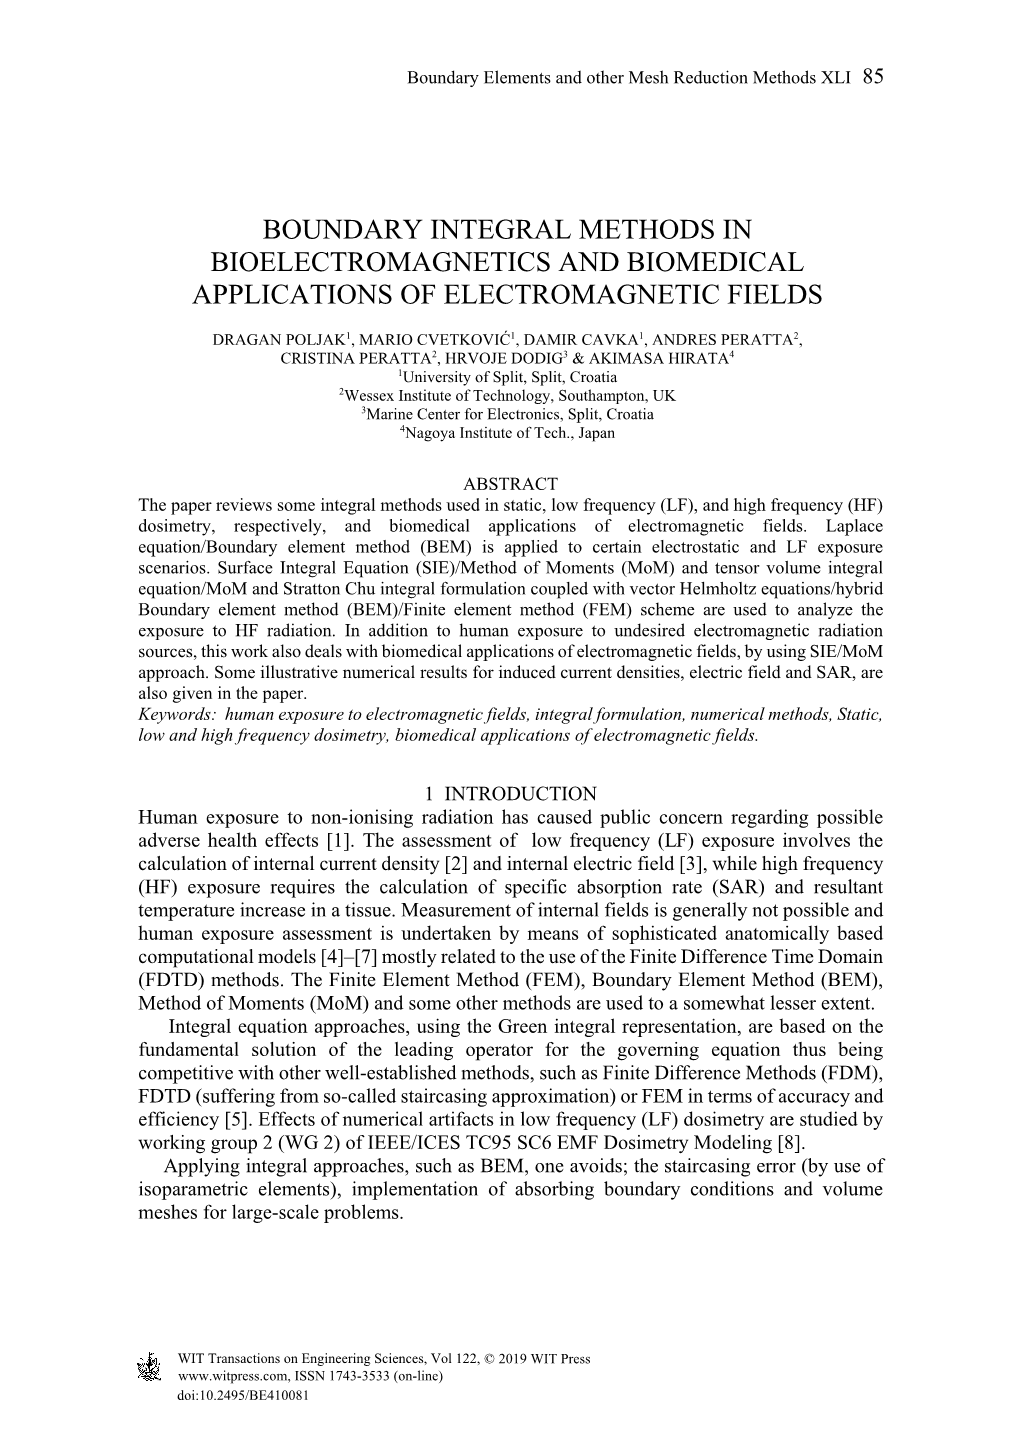 Boundary Integral Methods in Bioelectromagnetics and Biomedical Applications of Electromagnetic Fields